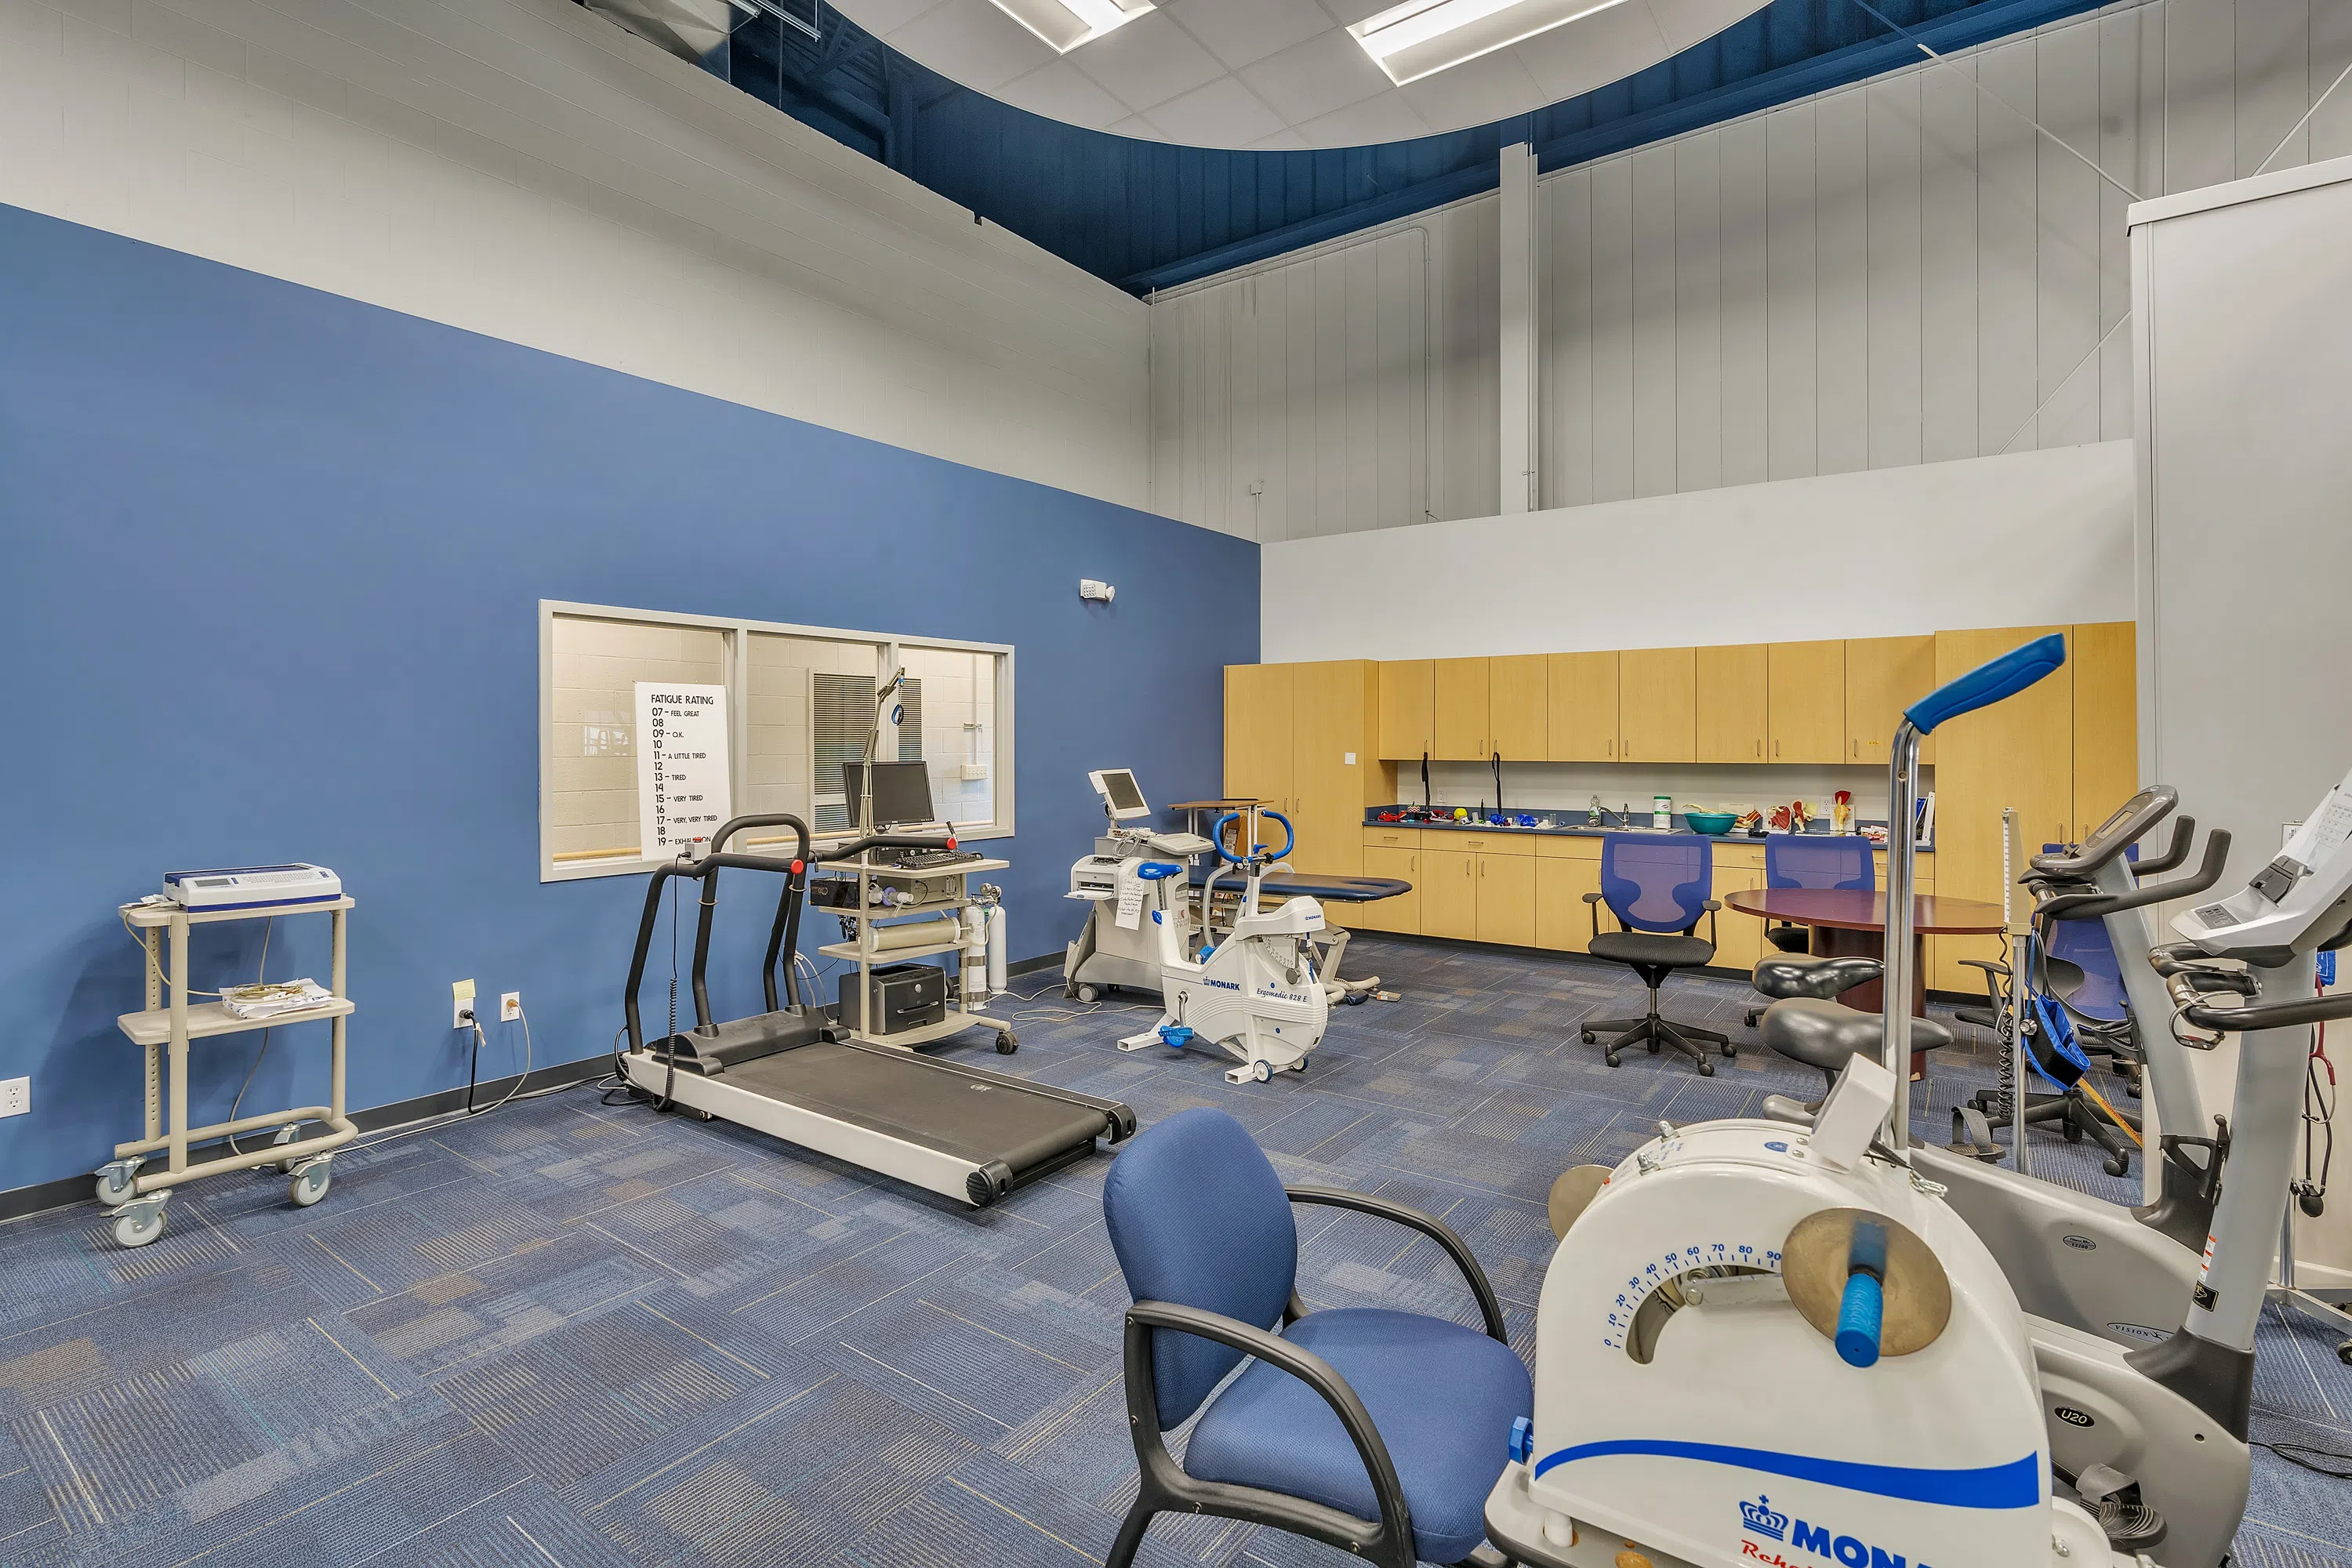 The McDonald Athletic Complex training facilities with equipment